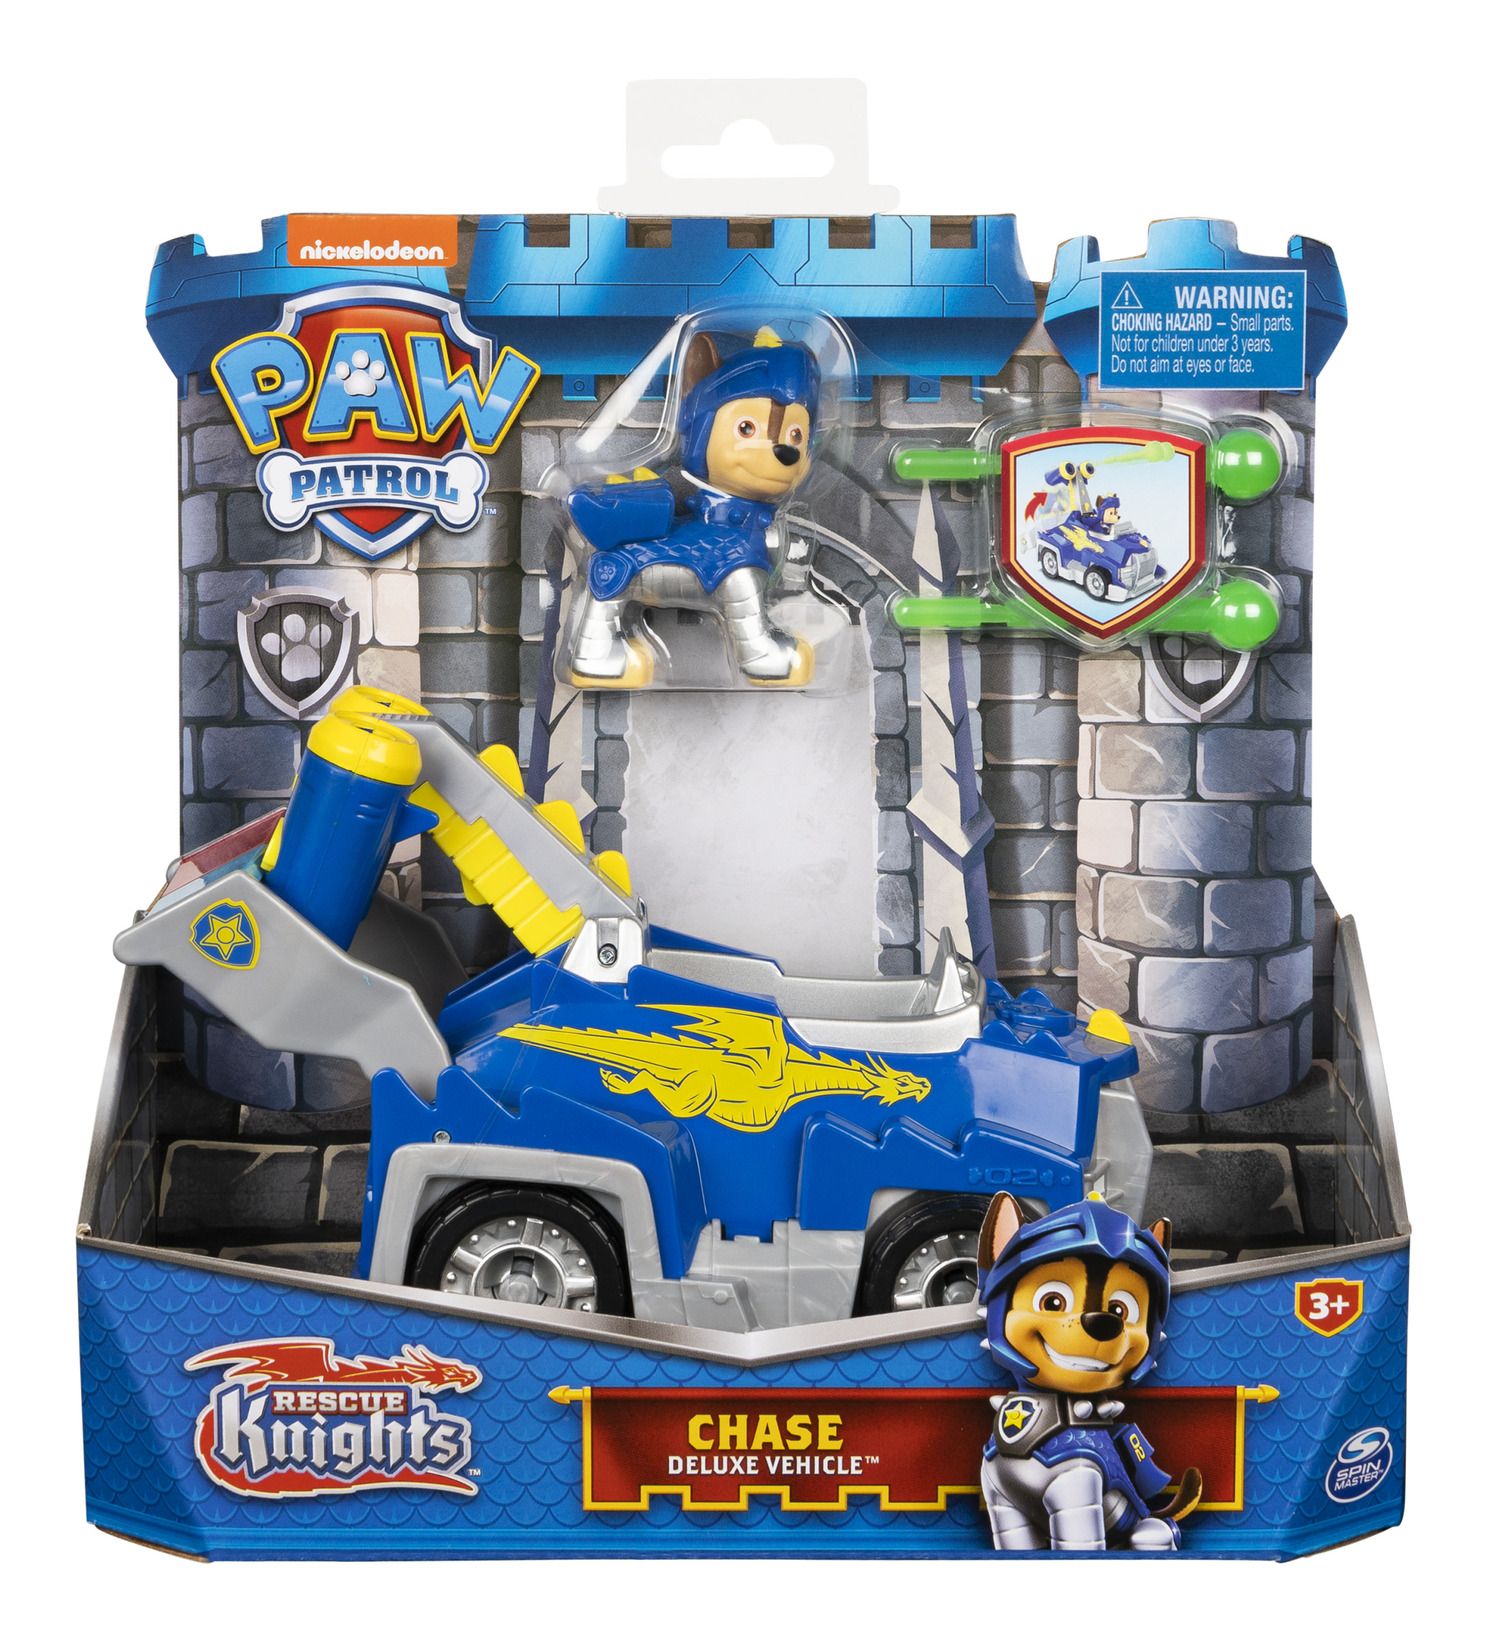 An image of Paw Patrol Rescue Knights Chase Deluxe Vehicle